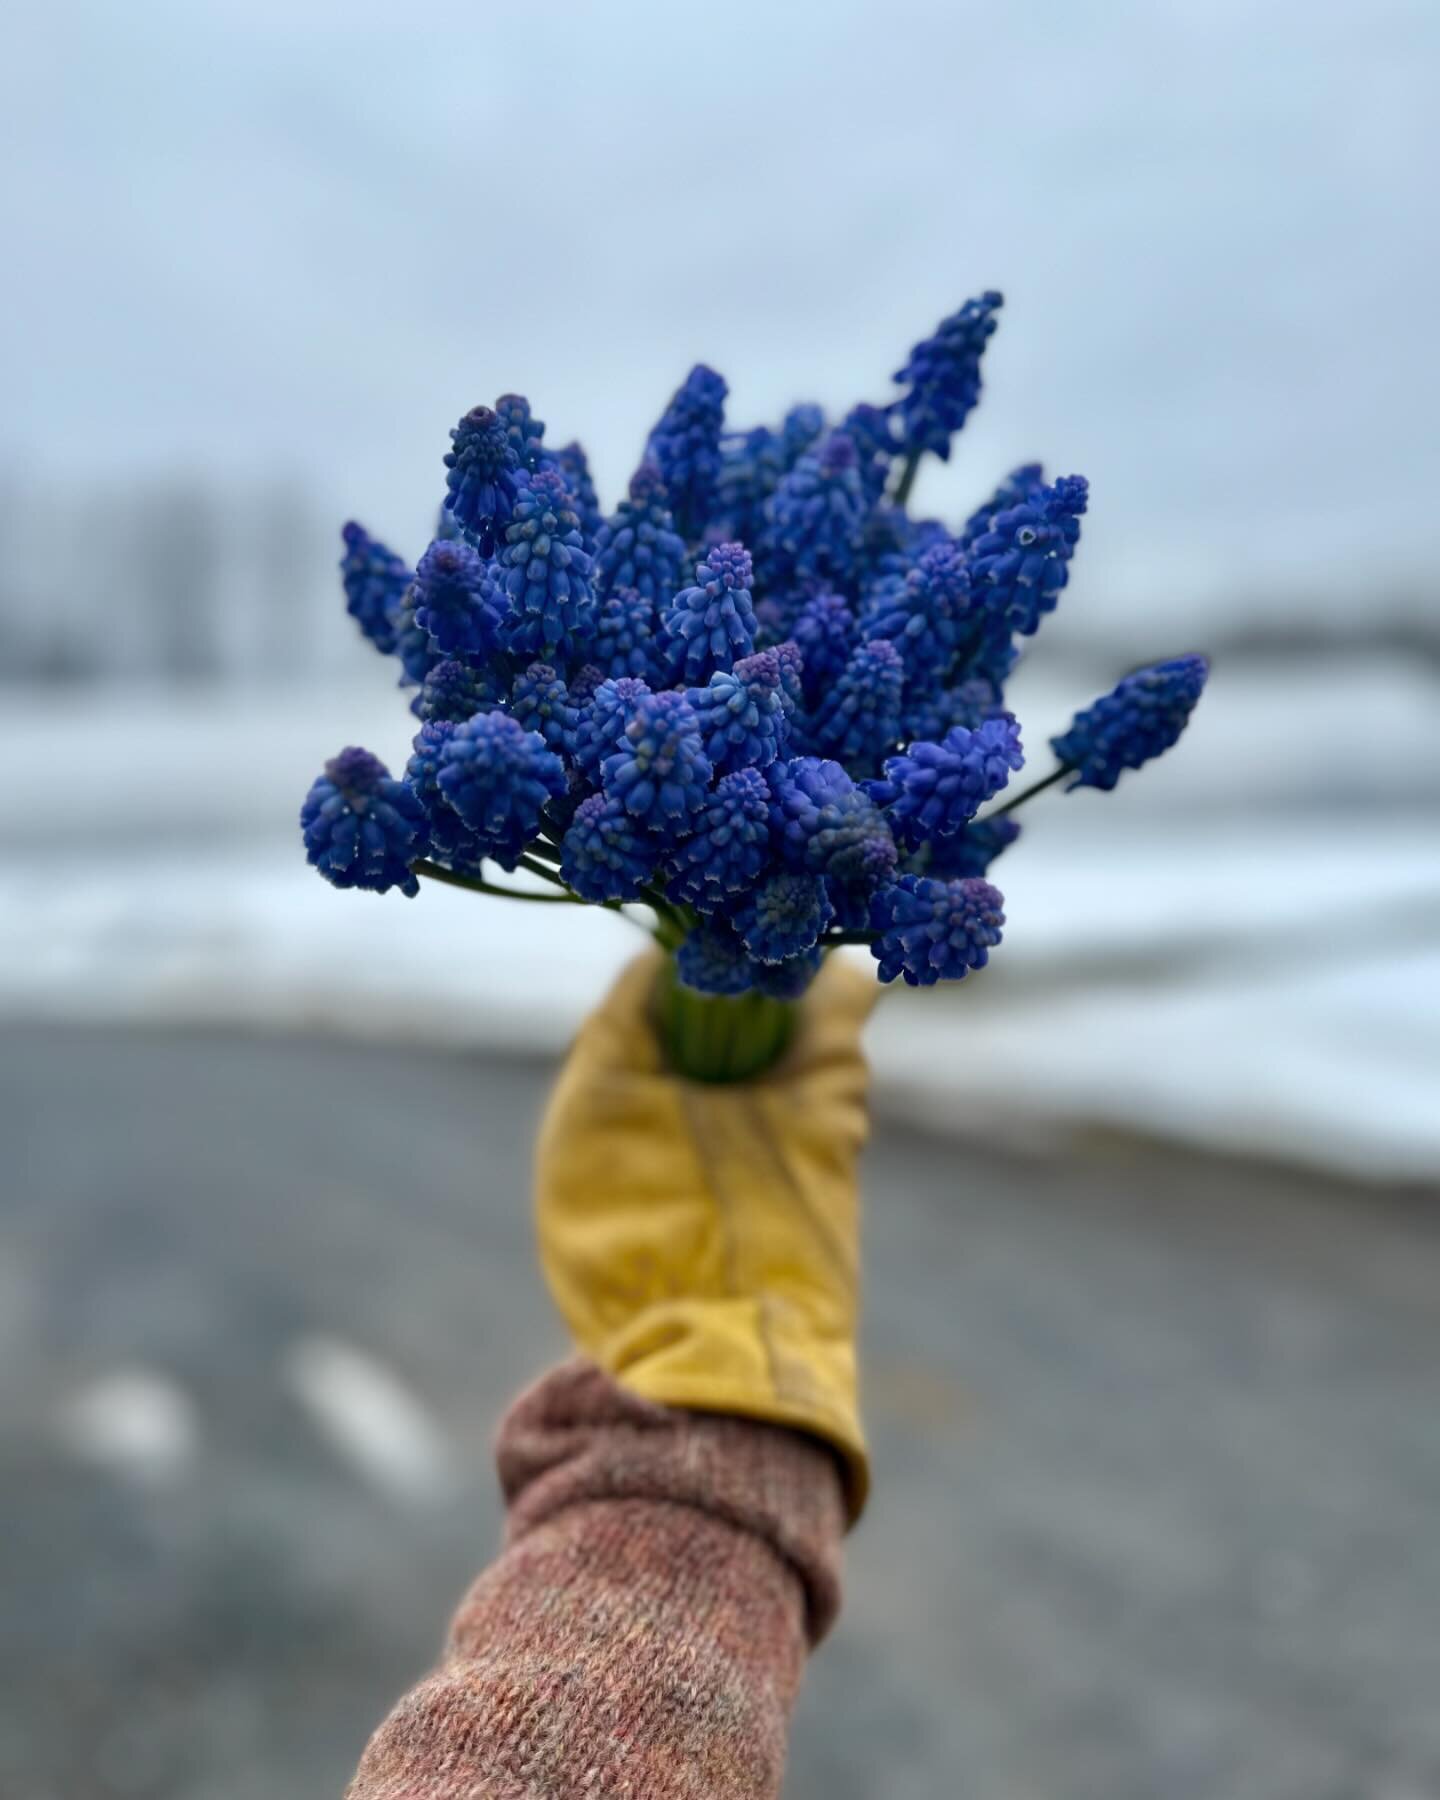 Grape Muscari smell like 🍇 $15/bunches @nightworkbread today. Also tulips @nightworkbread or Porch Pick Up all weekend or until we are sold out. And finalllyyyyy SUBSCRIPTIONS GO LIVE TODAY! Deliveries begin next week when the 🐇 is done doing their